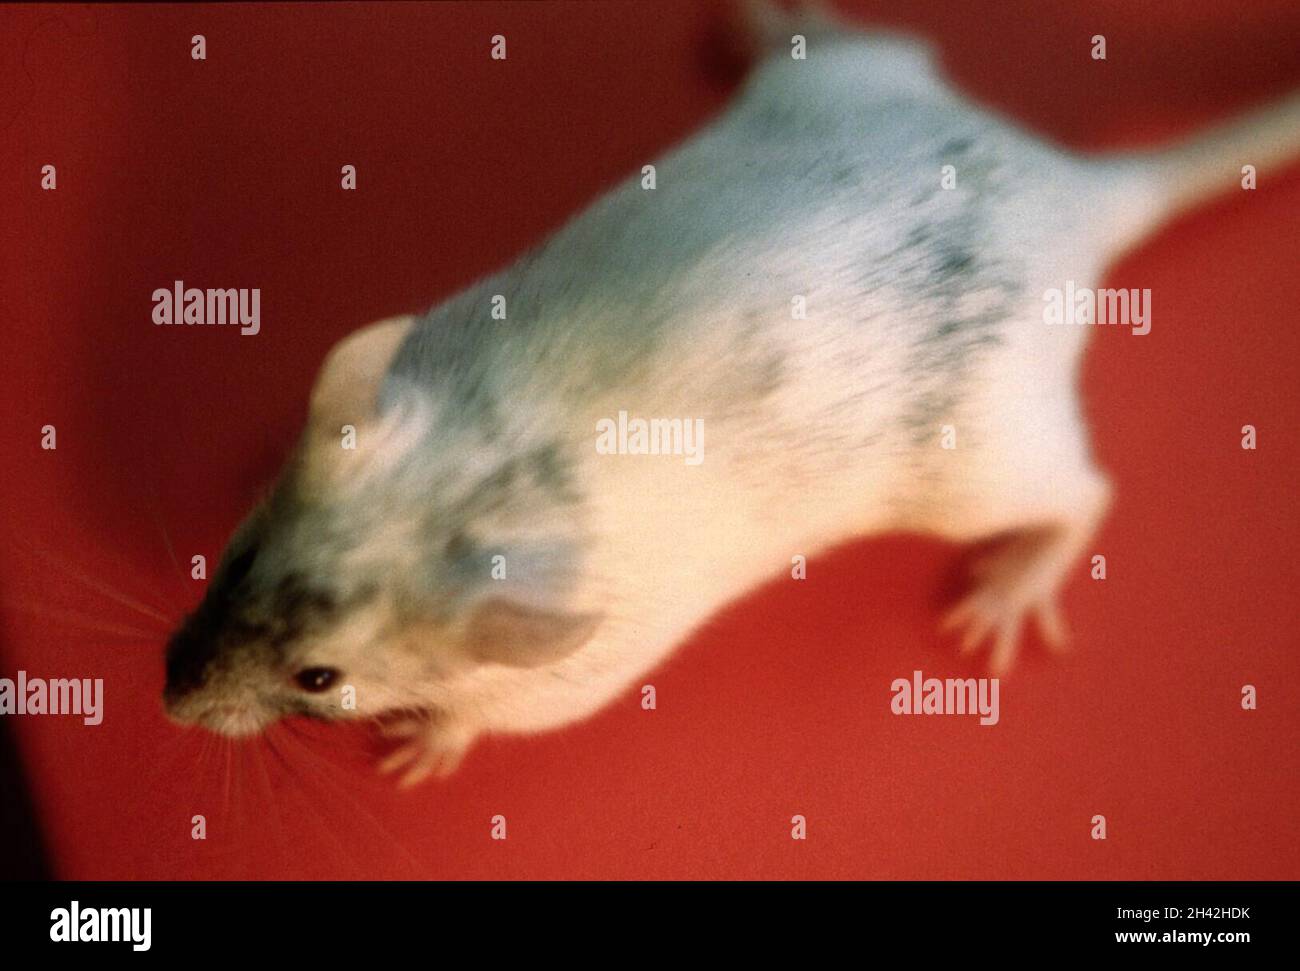 Chimeric mouse Stock Photo